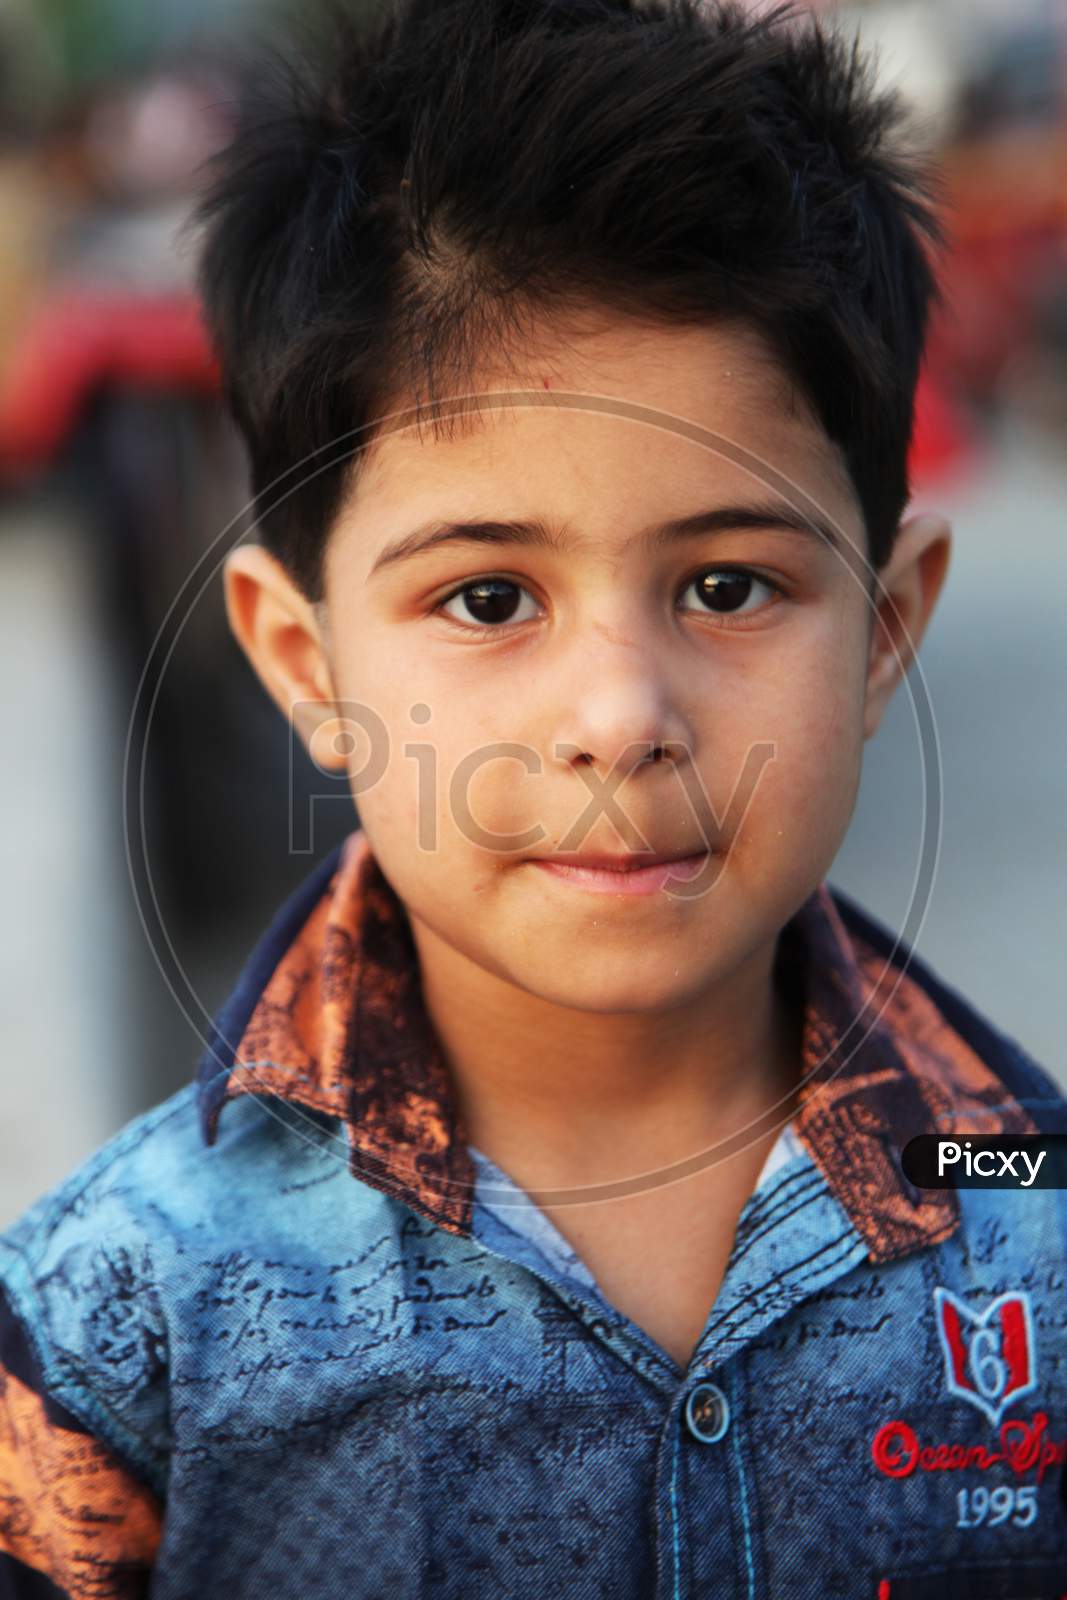 Portrait of an Indian Kid